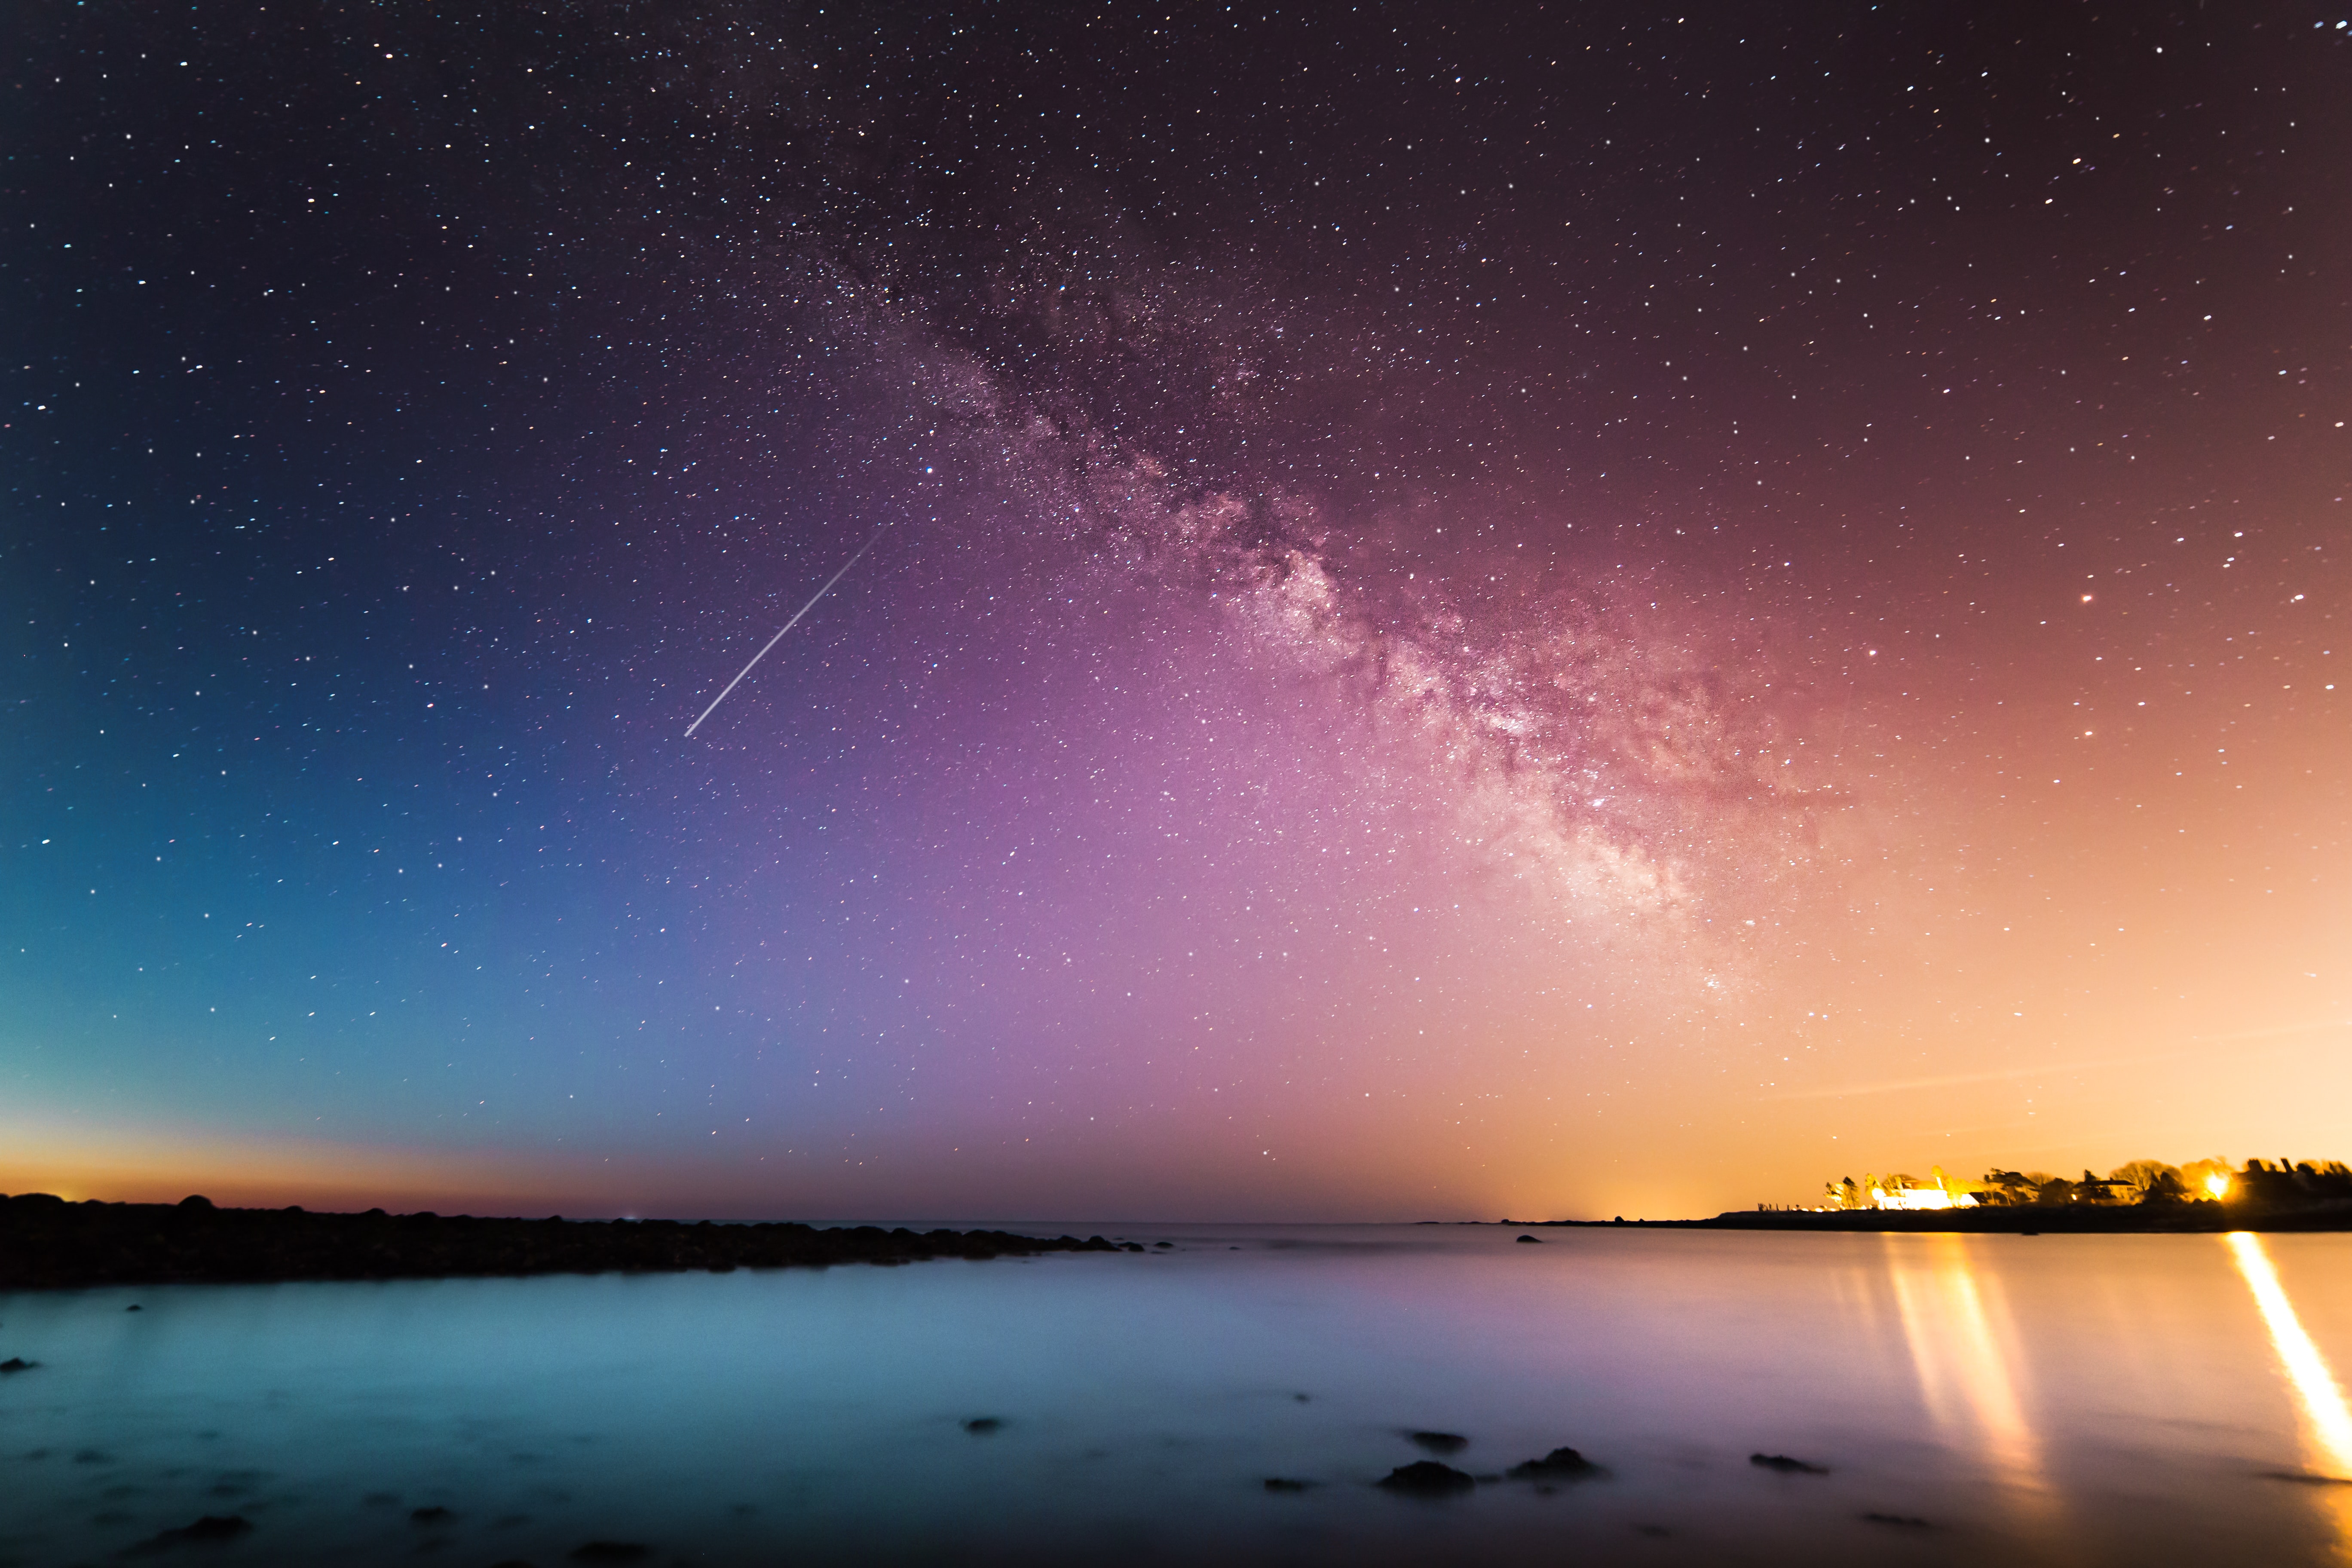 A shooting star and the milkyway seen at sunset above a lake